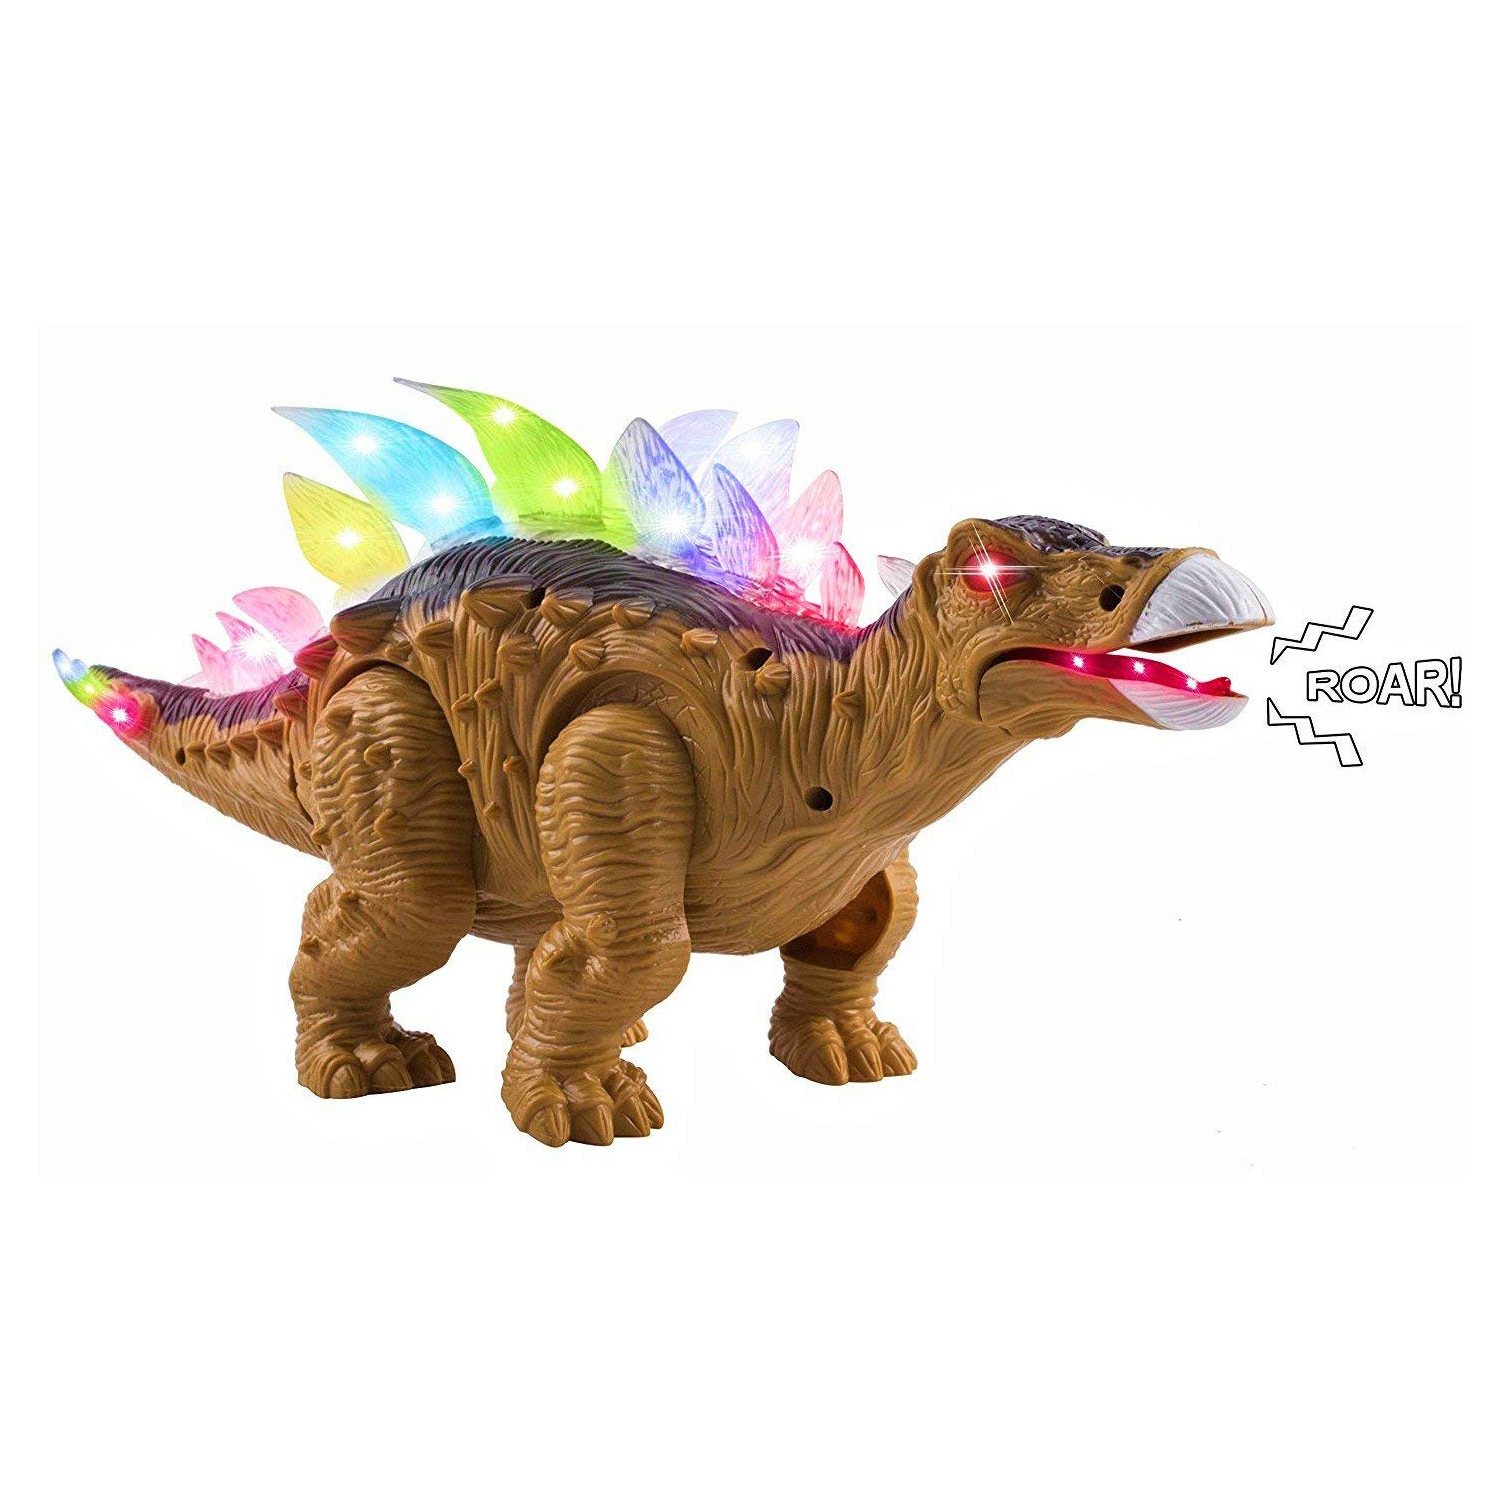 Toy Dinosaur Stegosaurus Moveable Battery Operated Walking Large 14.5\" Length Figure With LED Lights And Sounds Real Movement Safari Perfect Size And Quality For Kids To Play With (Brown Color)